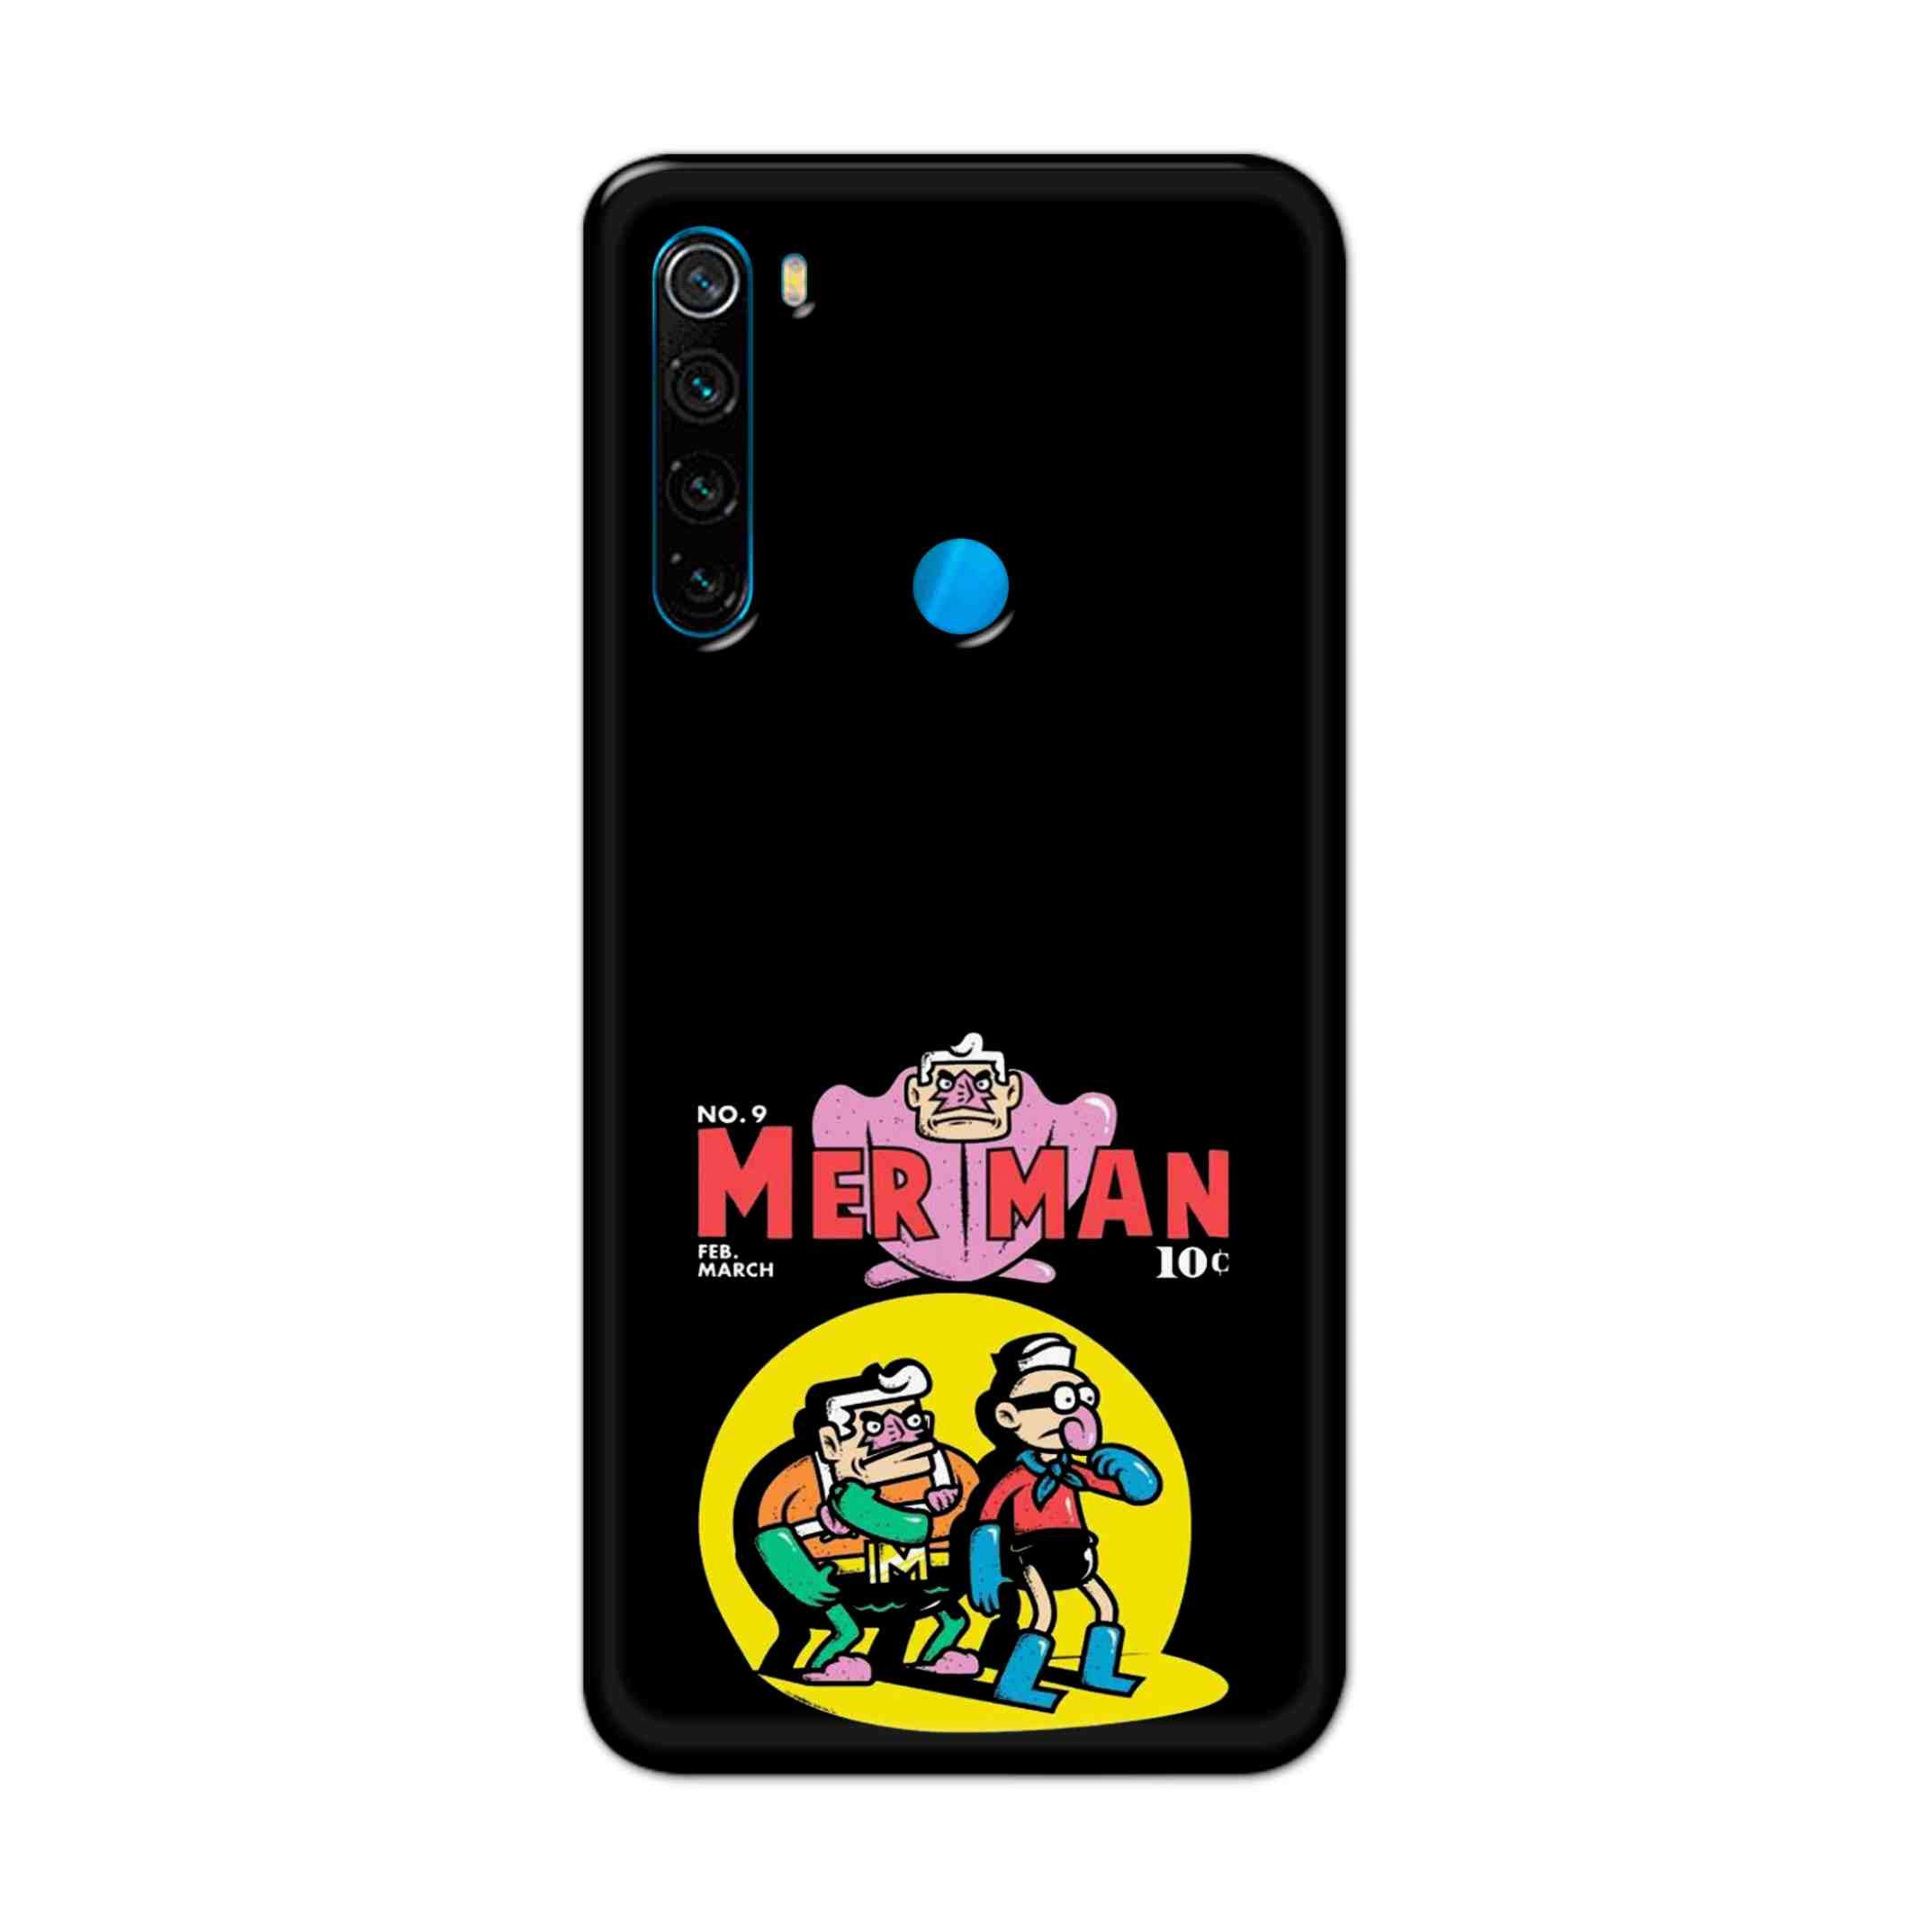 Buy Merman Hard Back Mobile Phone Case Cover For Xiaomi Redmi Note 8 Online